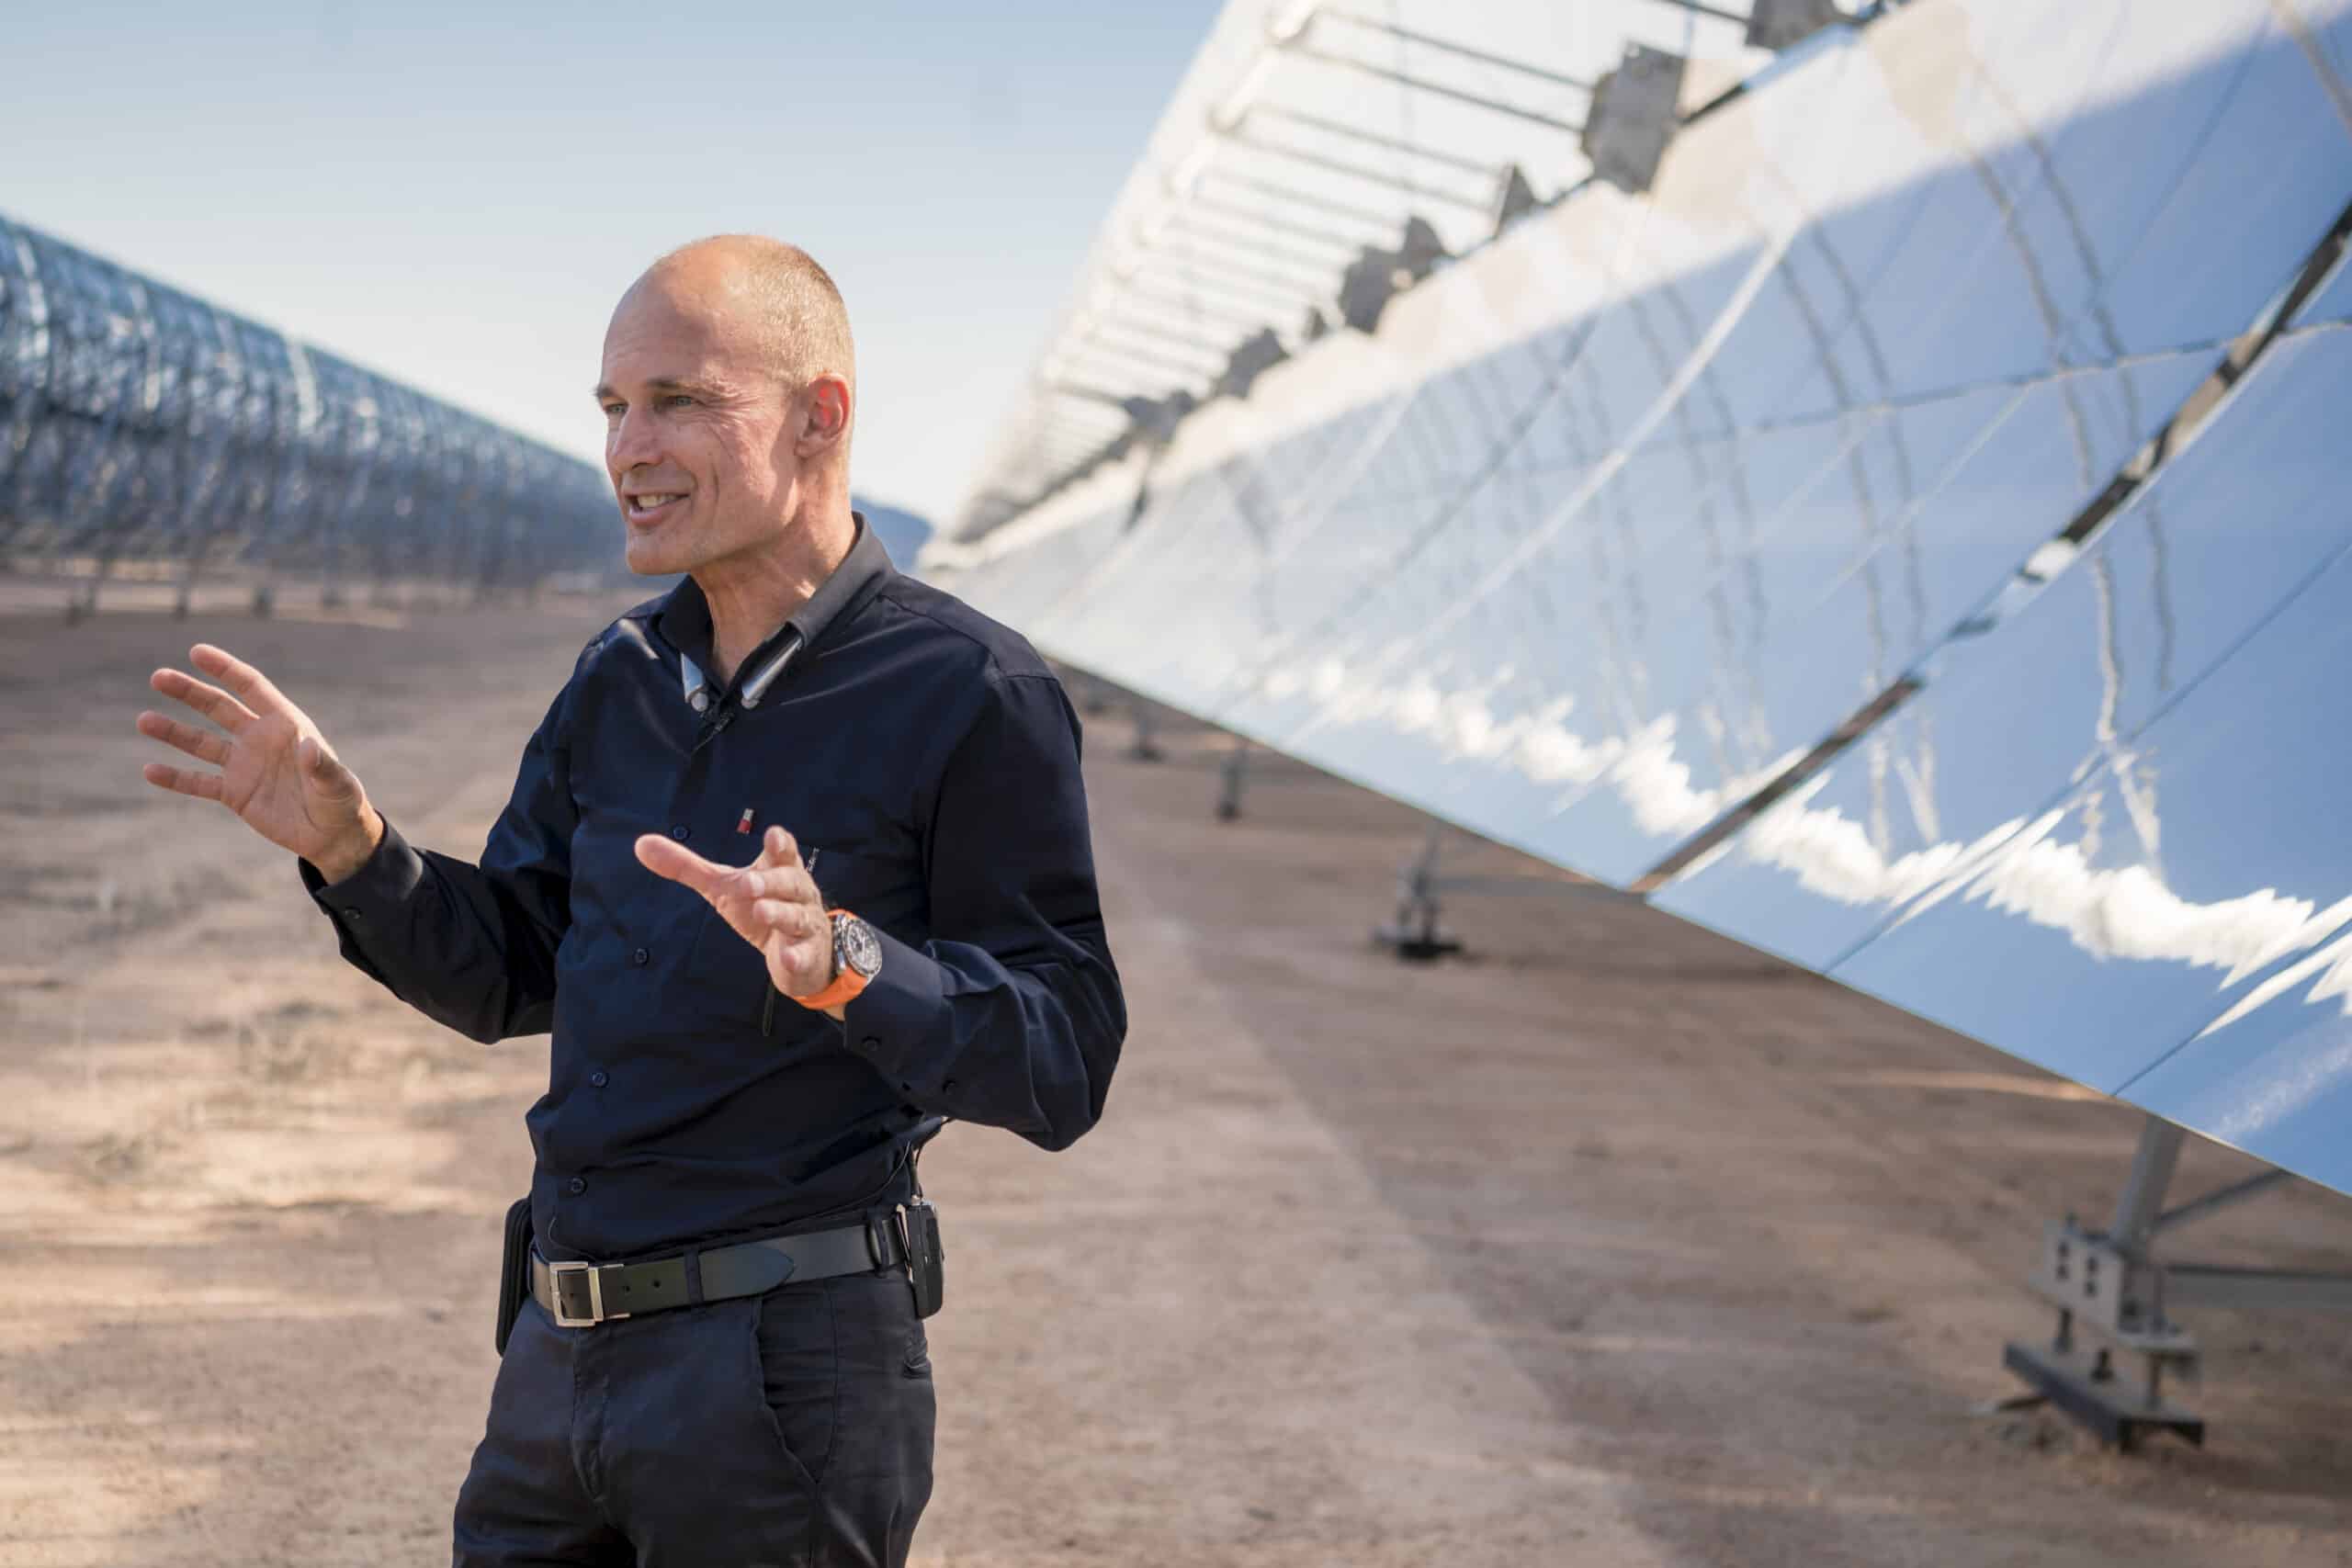 Phoenix, Arizona, USA, May 7th 2016: The Solar Impulse team is hosting an open day for the public at Phoenix Goodyear Airport. Visitors can discover the Si2, visit the hangar, meet the team and take pictures. Departed from Abu Dhabi on march 9th 2015, the Round-the-World Solar Flight will take 500 flight hours and cover 35’000 km. Swiss founders and pilots, Bertrand Piccard and André Borschberg hope to demonstrate how pioneering spirit, innovation and clean technologies can change the world. The duo will take turns flying Solar Impulse 2, changing at each stop and will fly over the Arabian Sea, to India, to Myanmar, to China, across the Pacific Ocean, to the United States, over the Atlantic Ocean to Southern Europe or Northern Africa before finishing the journey by returning to the initial departure point. Landings will be made every few days to switch pilots and organize public events for governments, schools and universities.